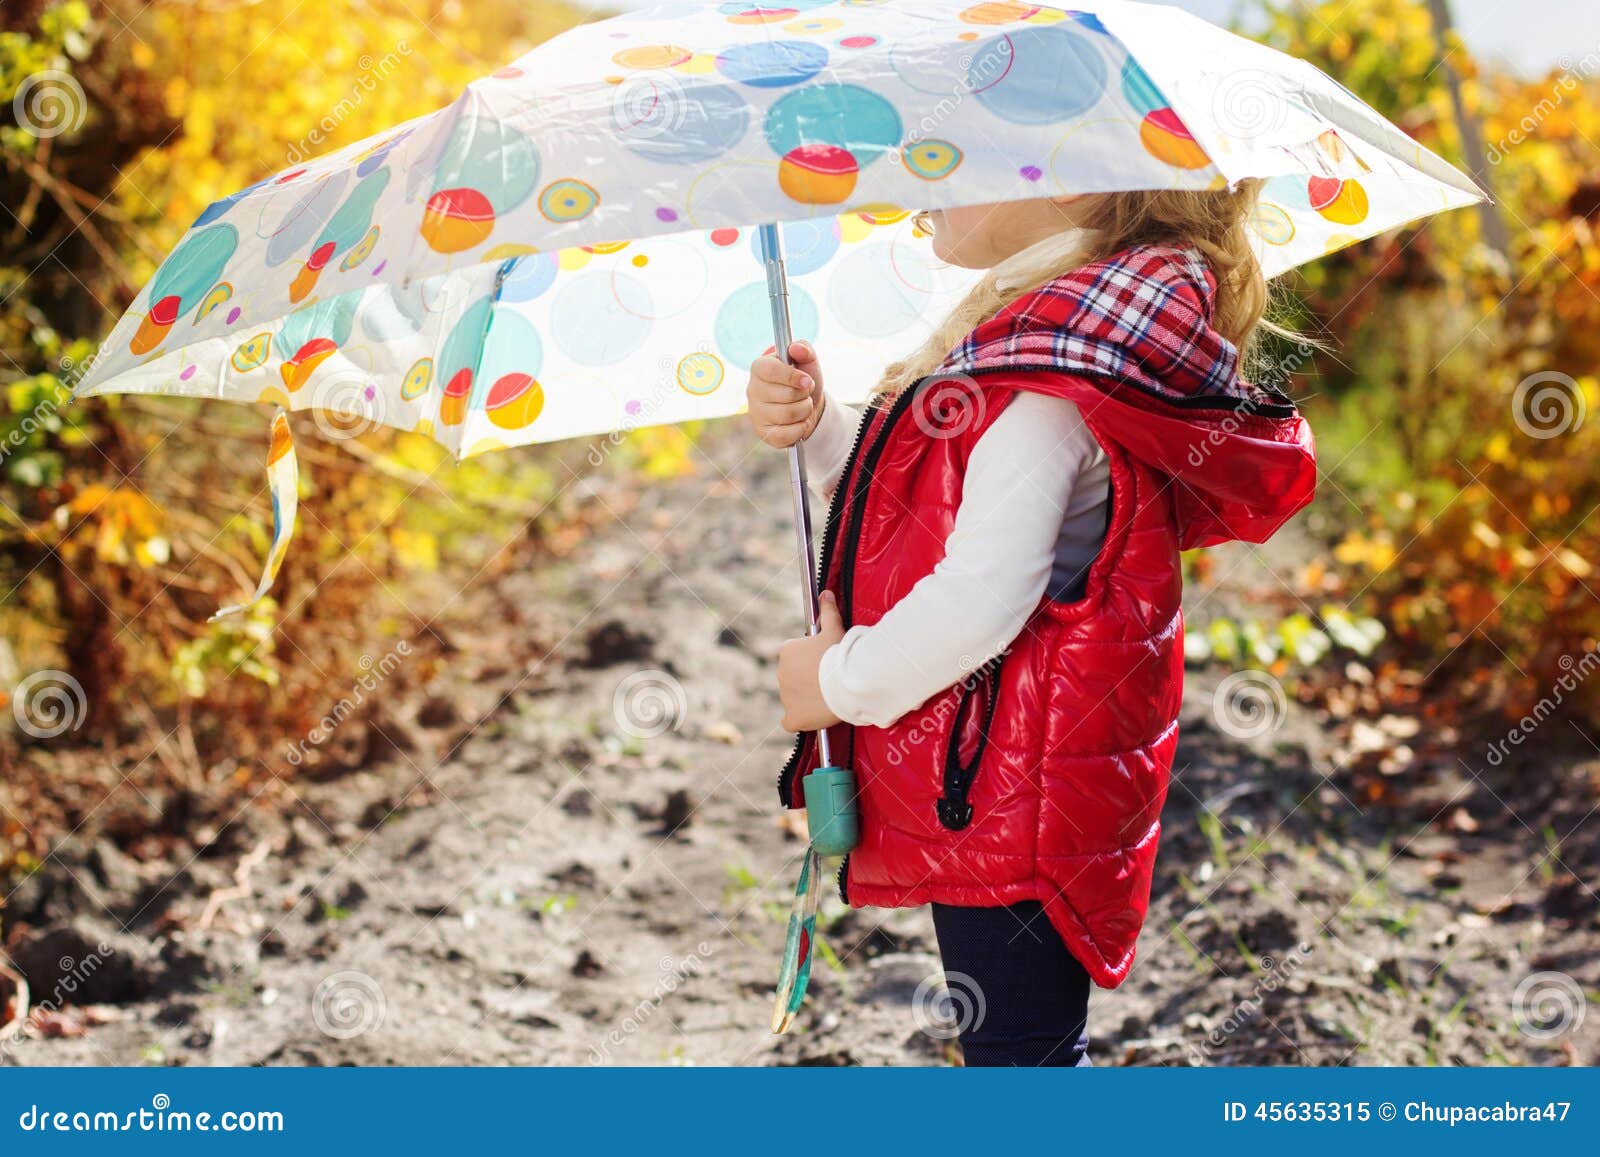 Little girl with umbrella in red vest outdoor. Smiling little girl with white umbrella is wearing red vest and boots outdoor